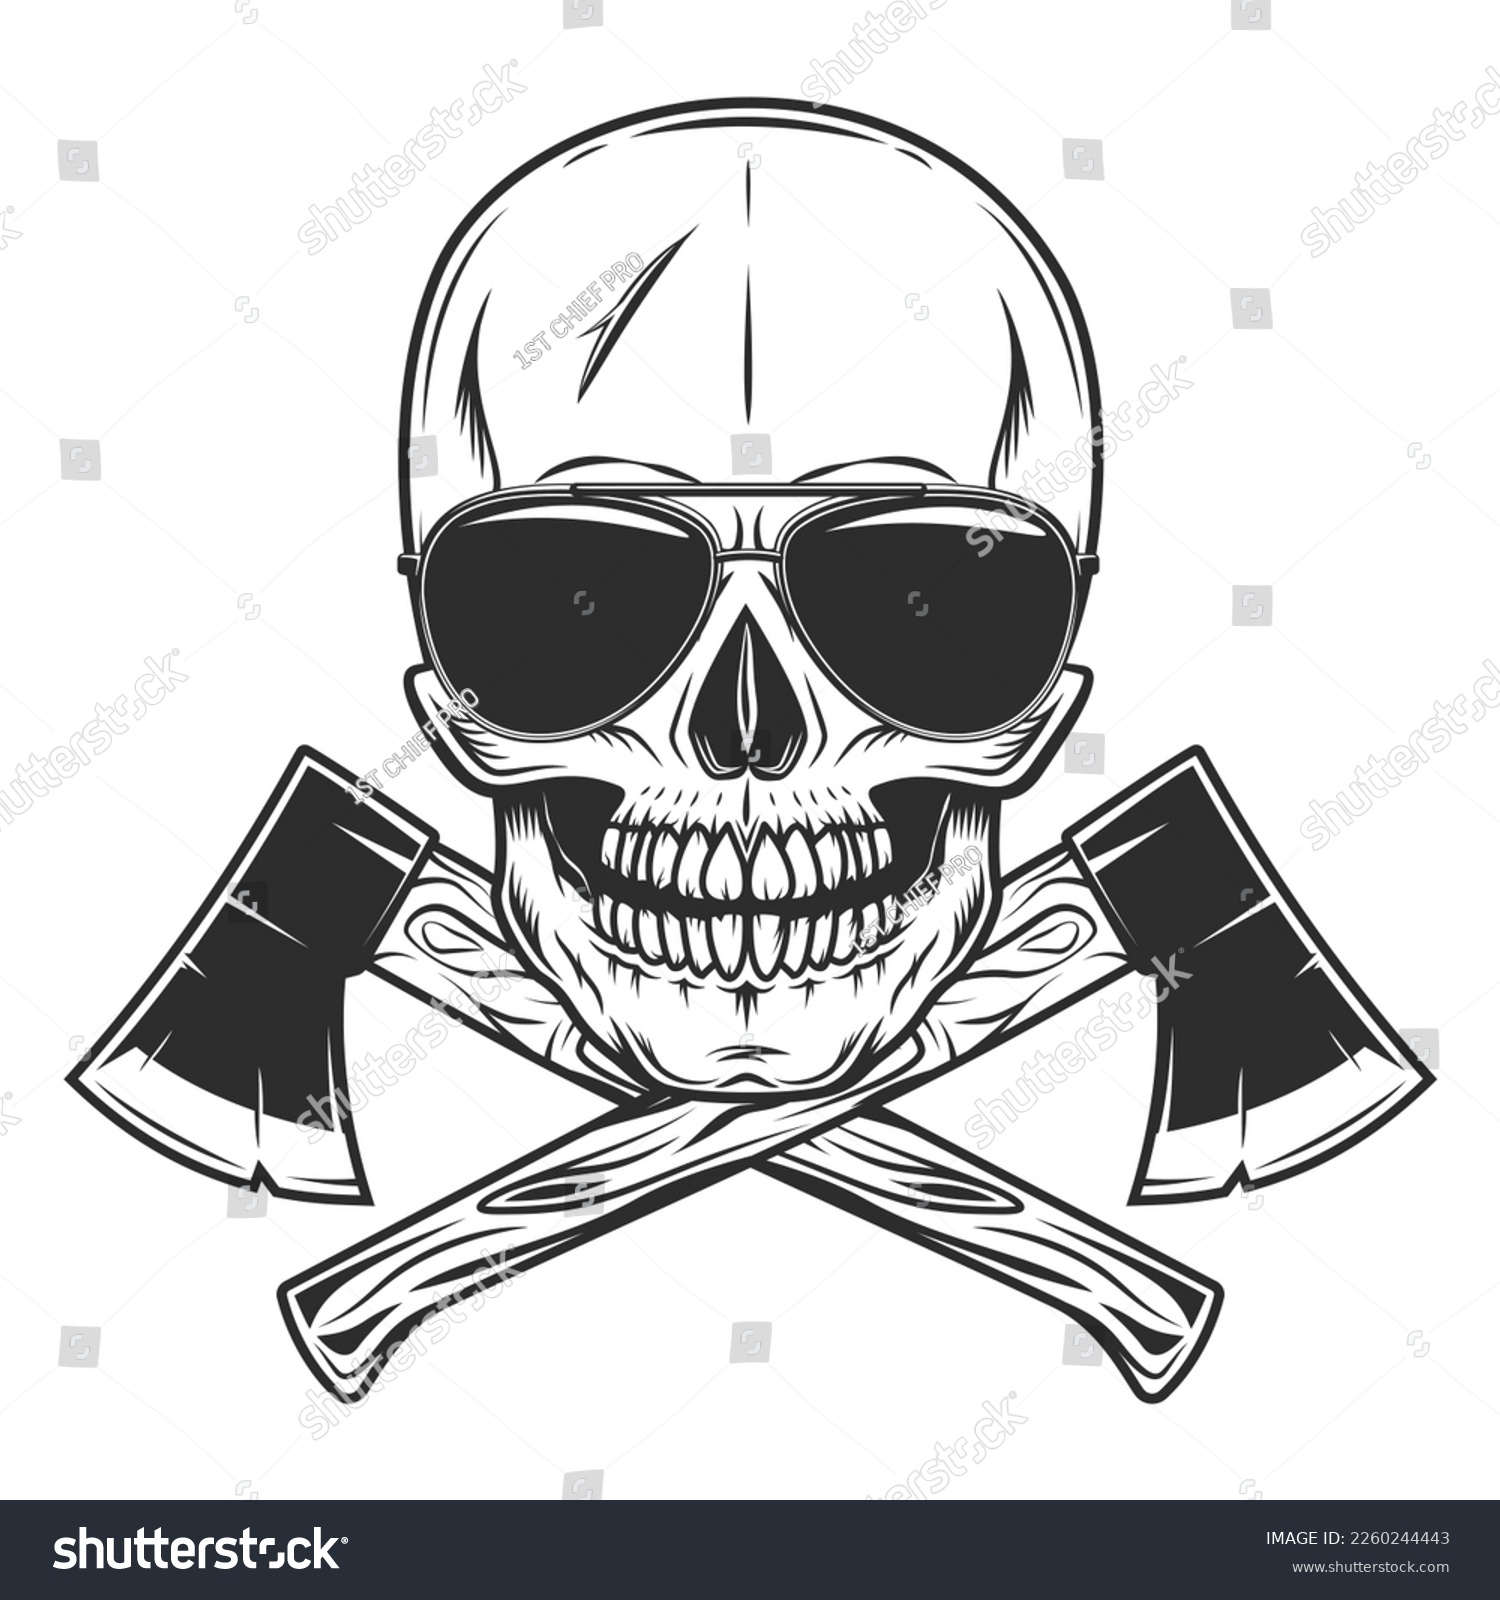 SVG of Skull in sunglasses and crossed metal ax with handle made of wood. Wooden axe construction builder tool. Element for business woodworking or lumberjack. svg